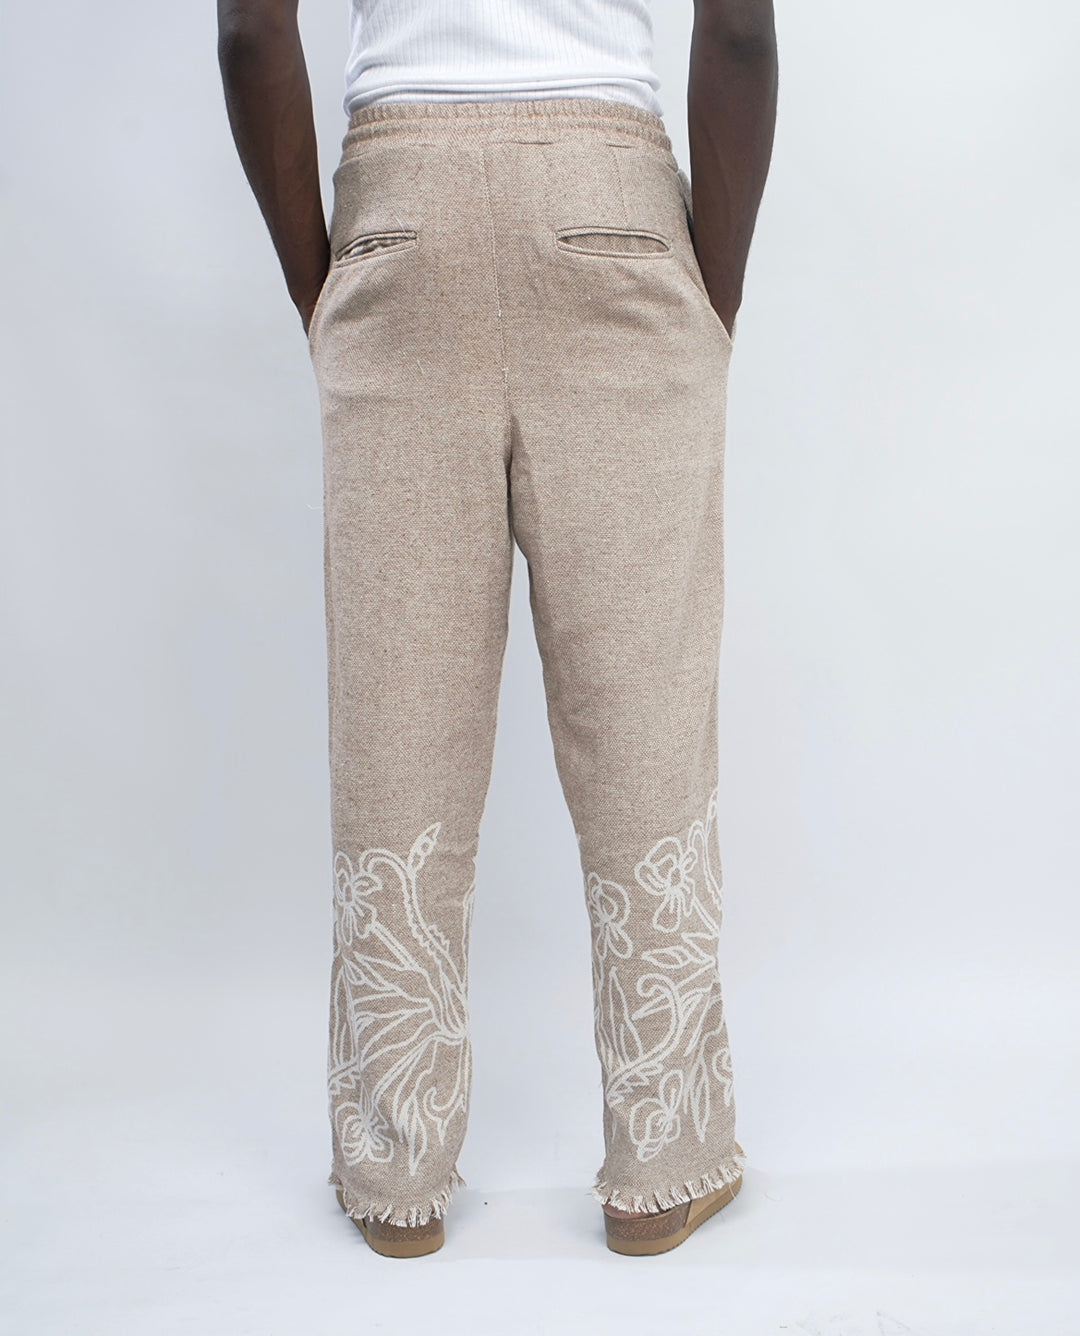 Giesto distressed hem woven pants with floral prints